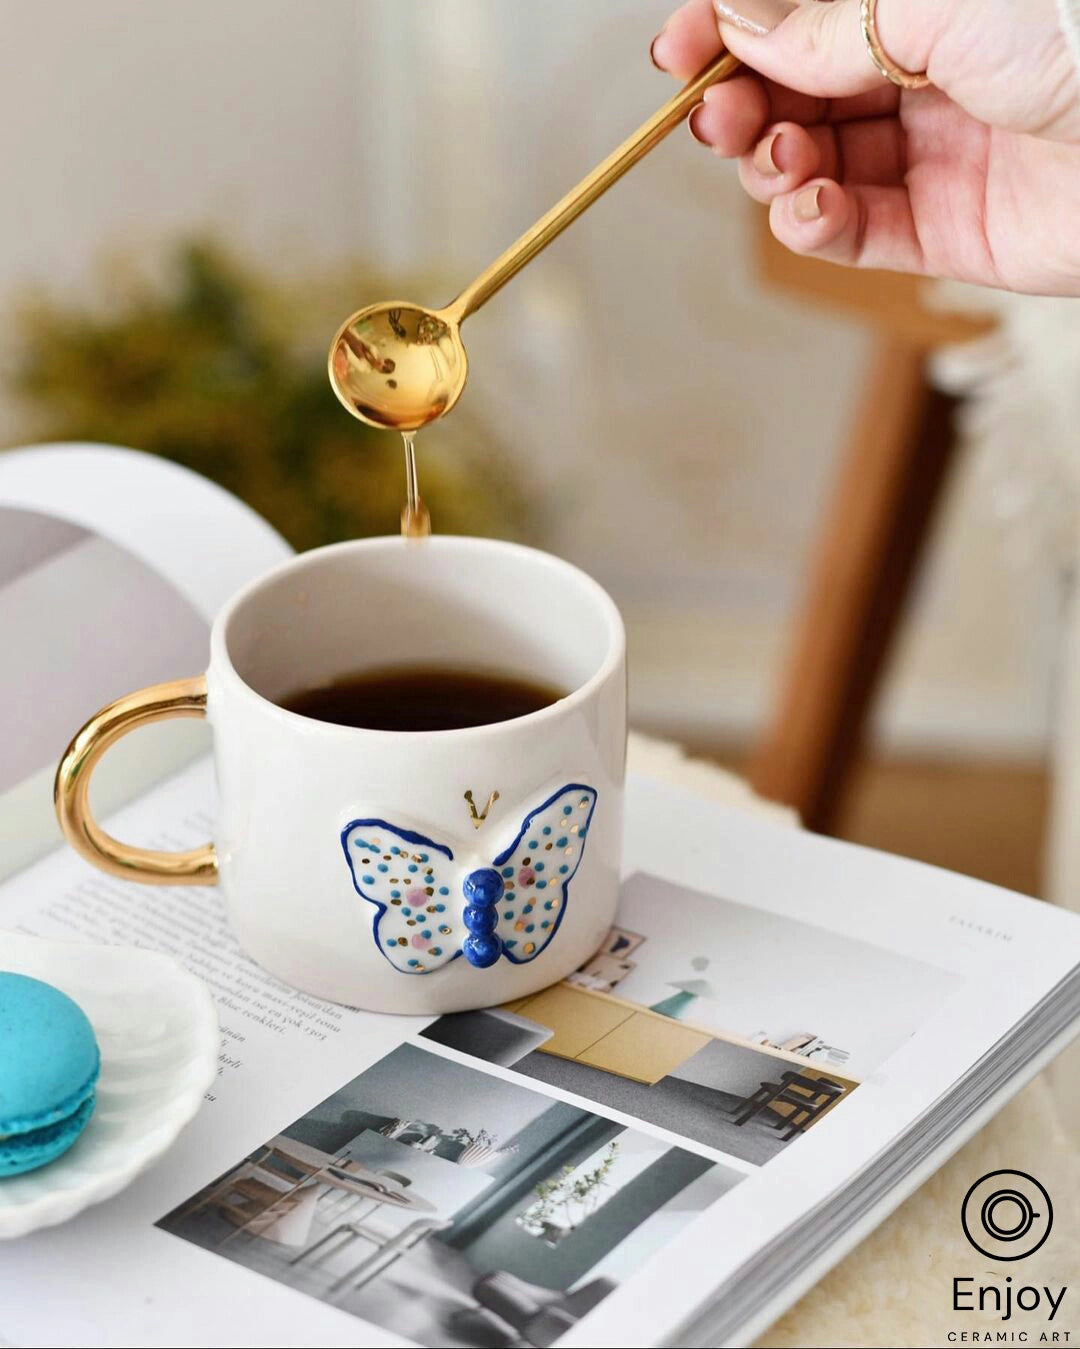 A hand is drizzling honey into a white ceramic mug with a golden handle and a blue butterfly design, which sits atop an open magazine with interior design images. The scene is accented by a blue macaron on the side, blending a moment of indulgence with a touch of elegance.